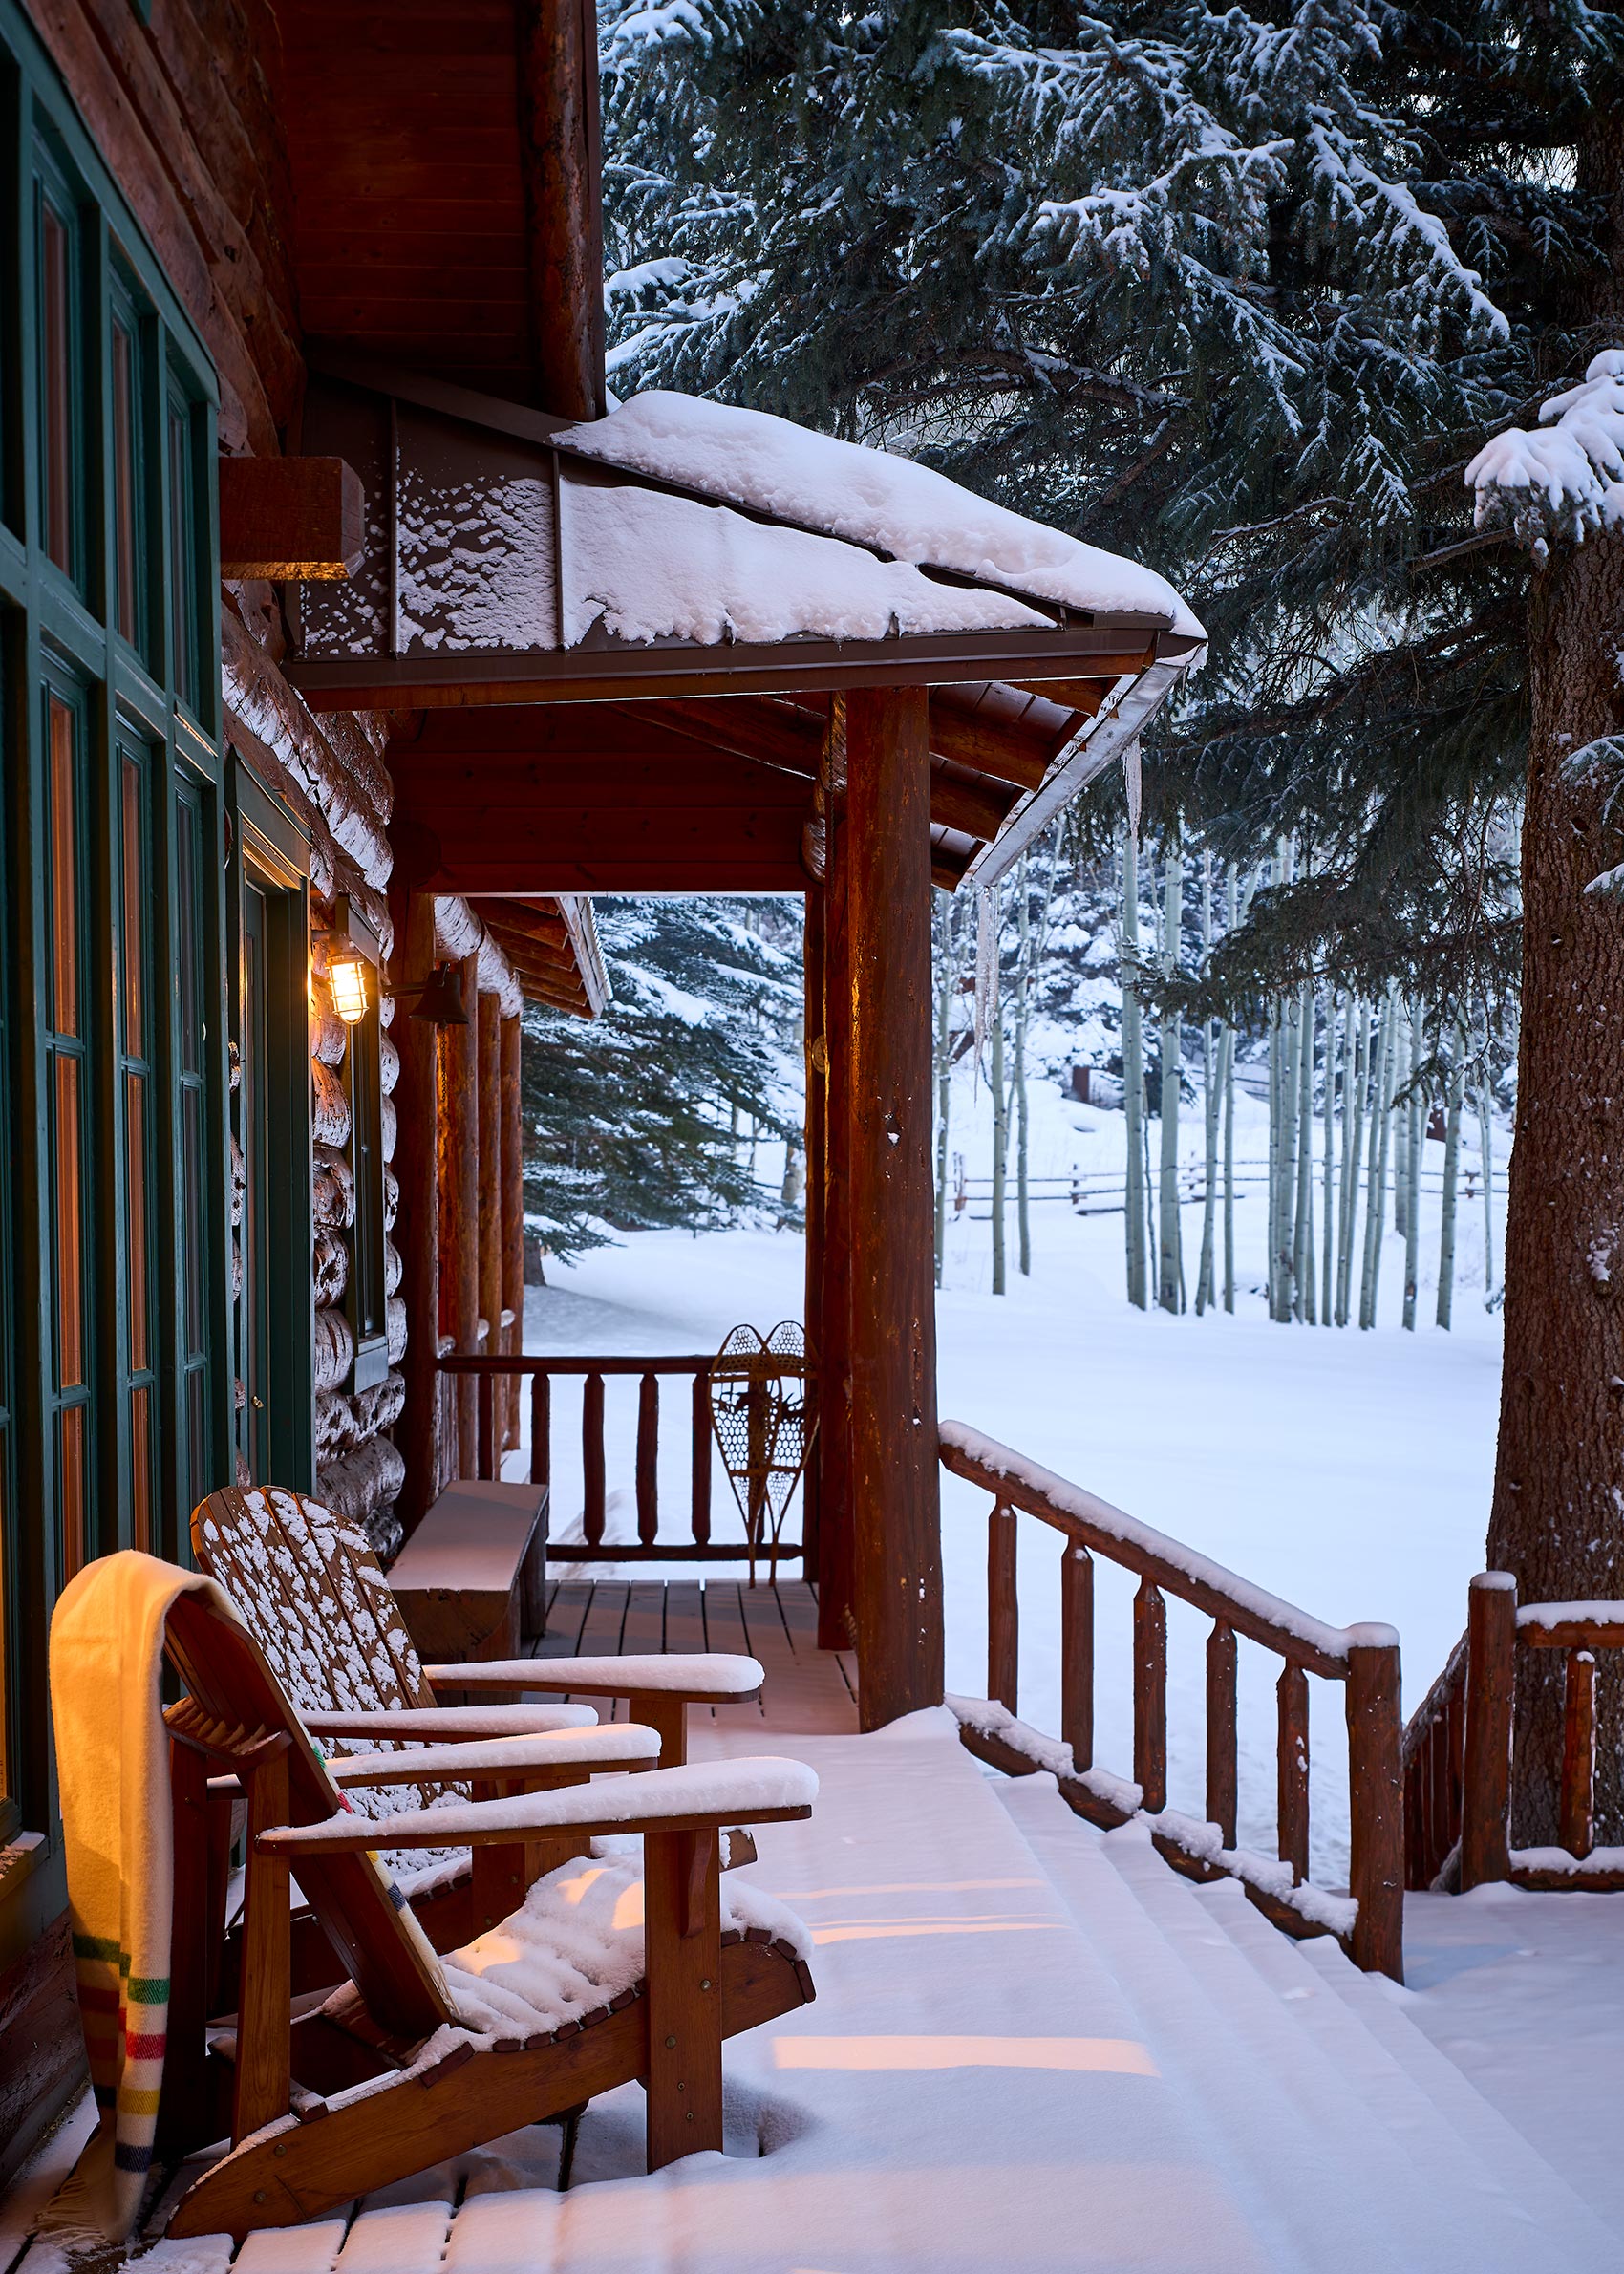 David-Nitto-Snowmass-12-13-22-Porch-in-Snow-Web